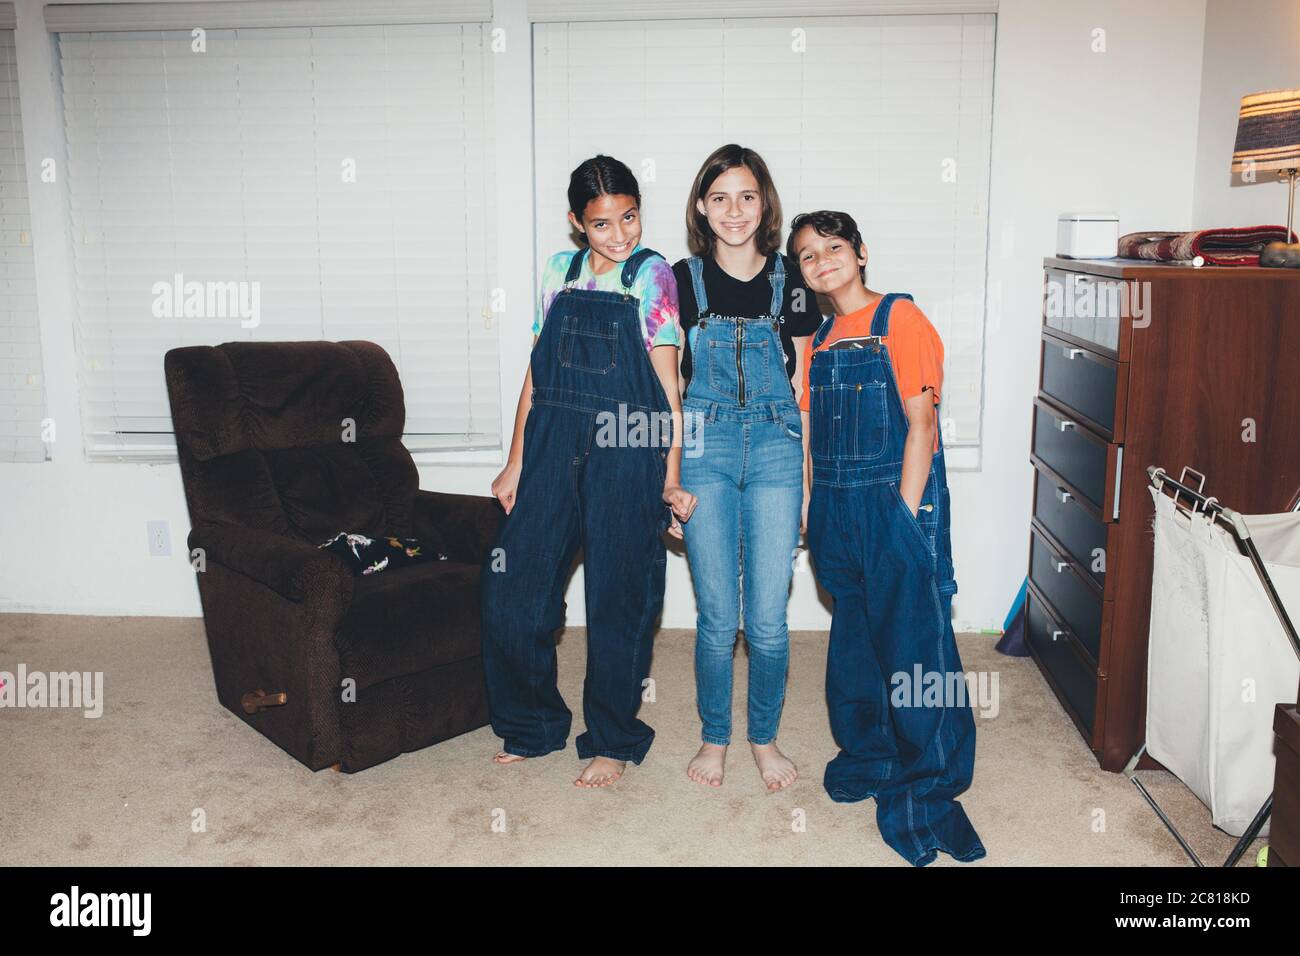 Three siblings smile while all wearing overalls and two oversized Stock Photo